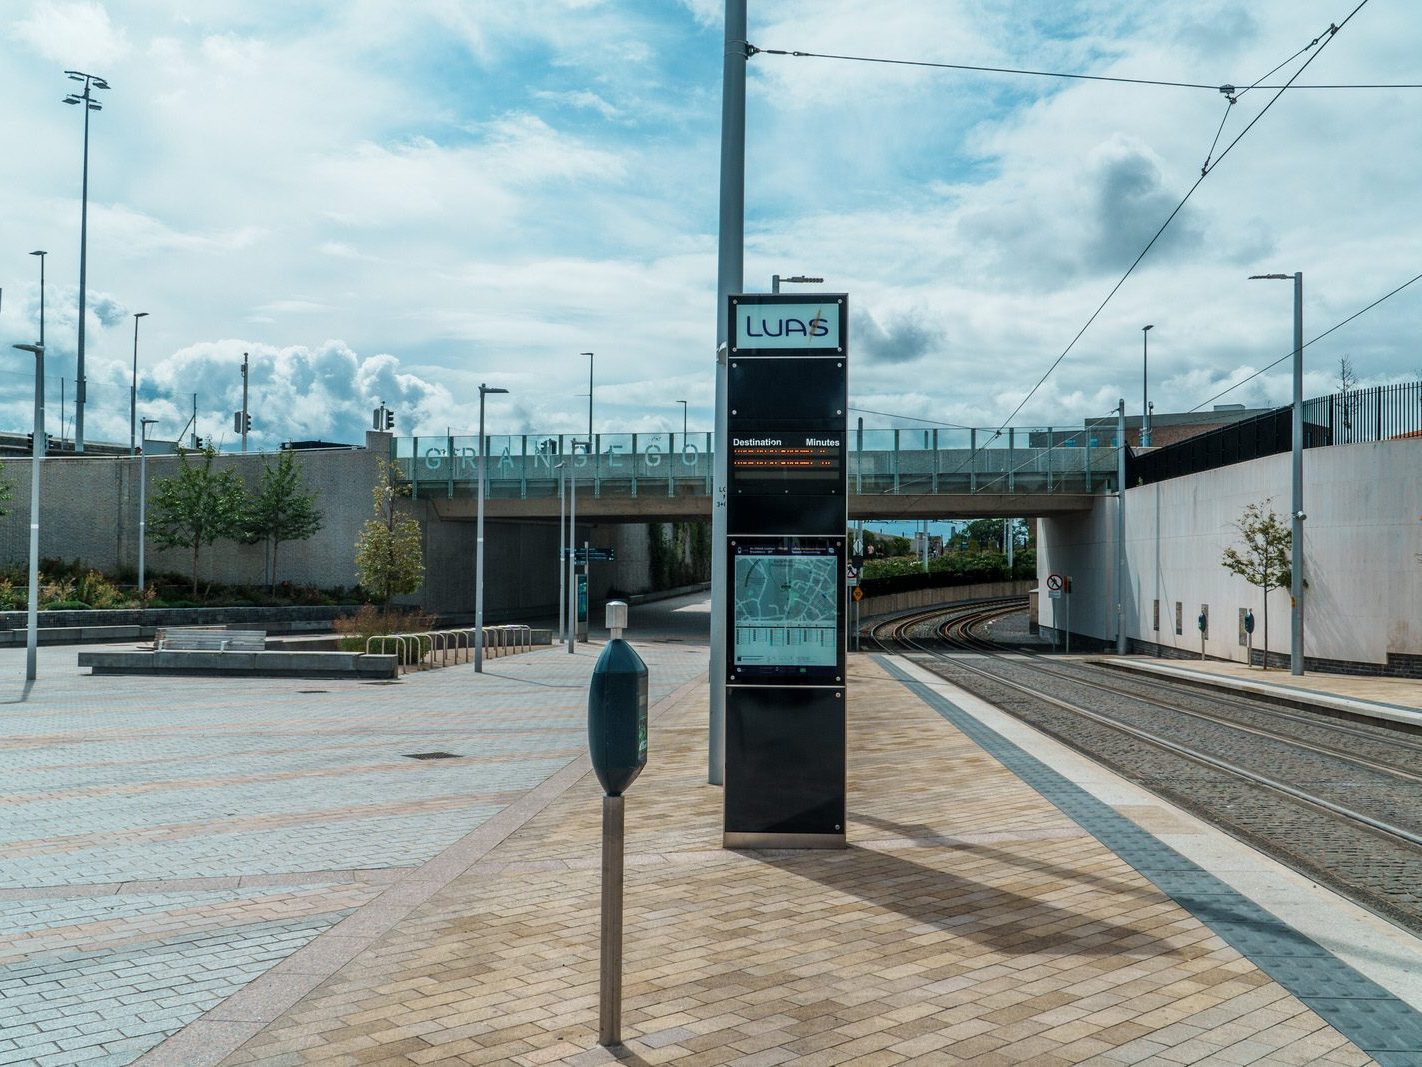 THE BROADSTONE TRAM STOP [IS IT ATTRACTING ANTI-SOCIAL ACTIVITY] 001